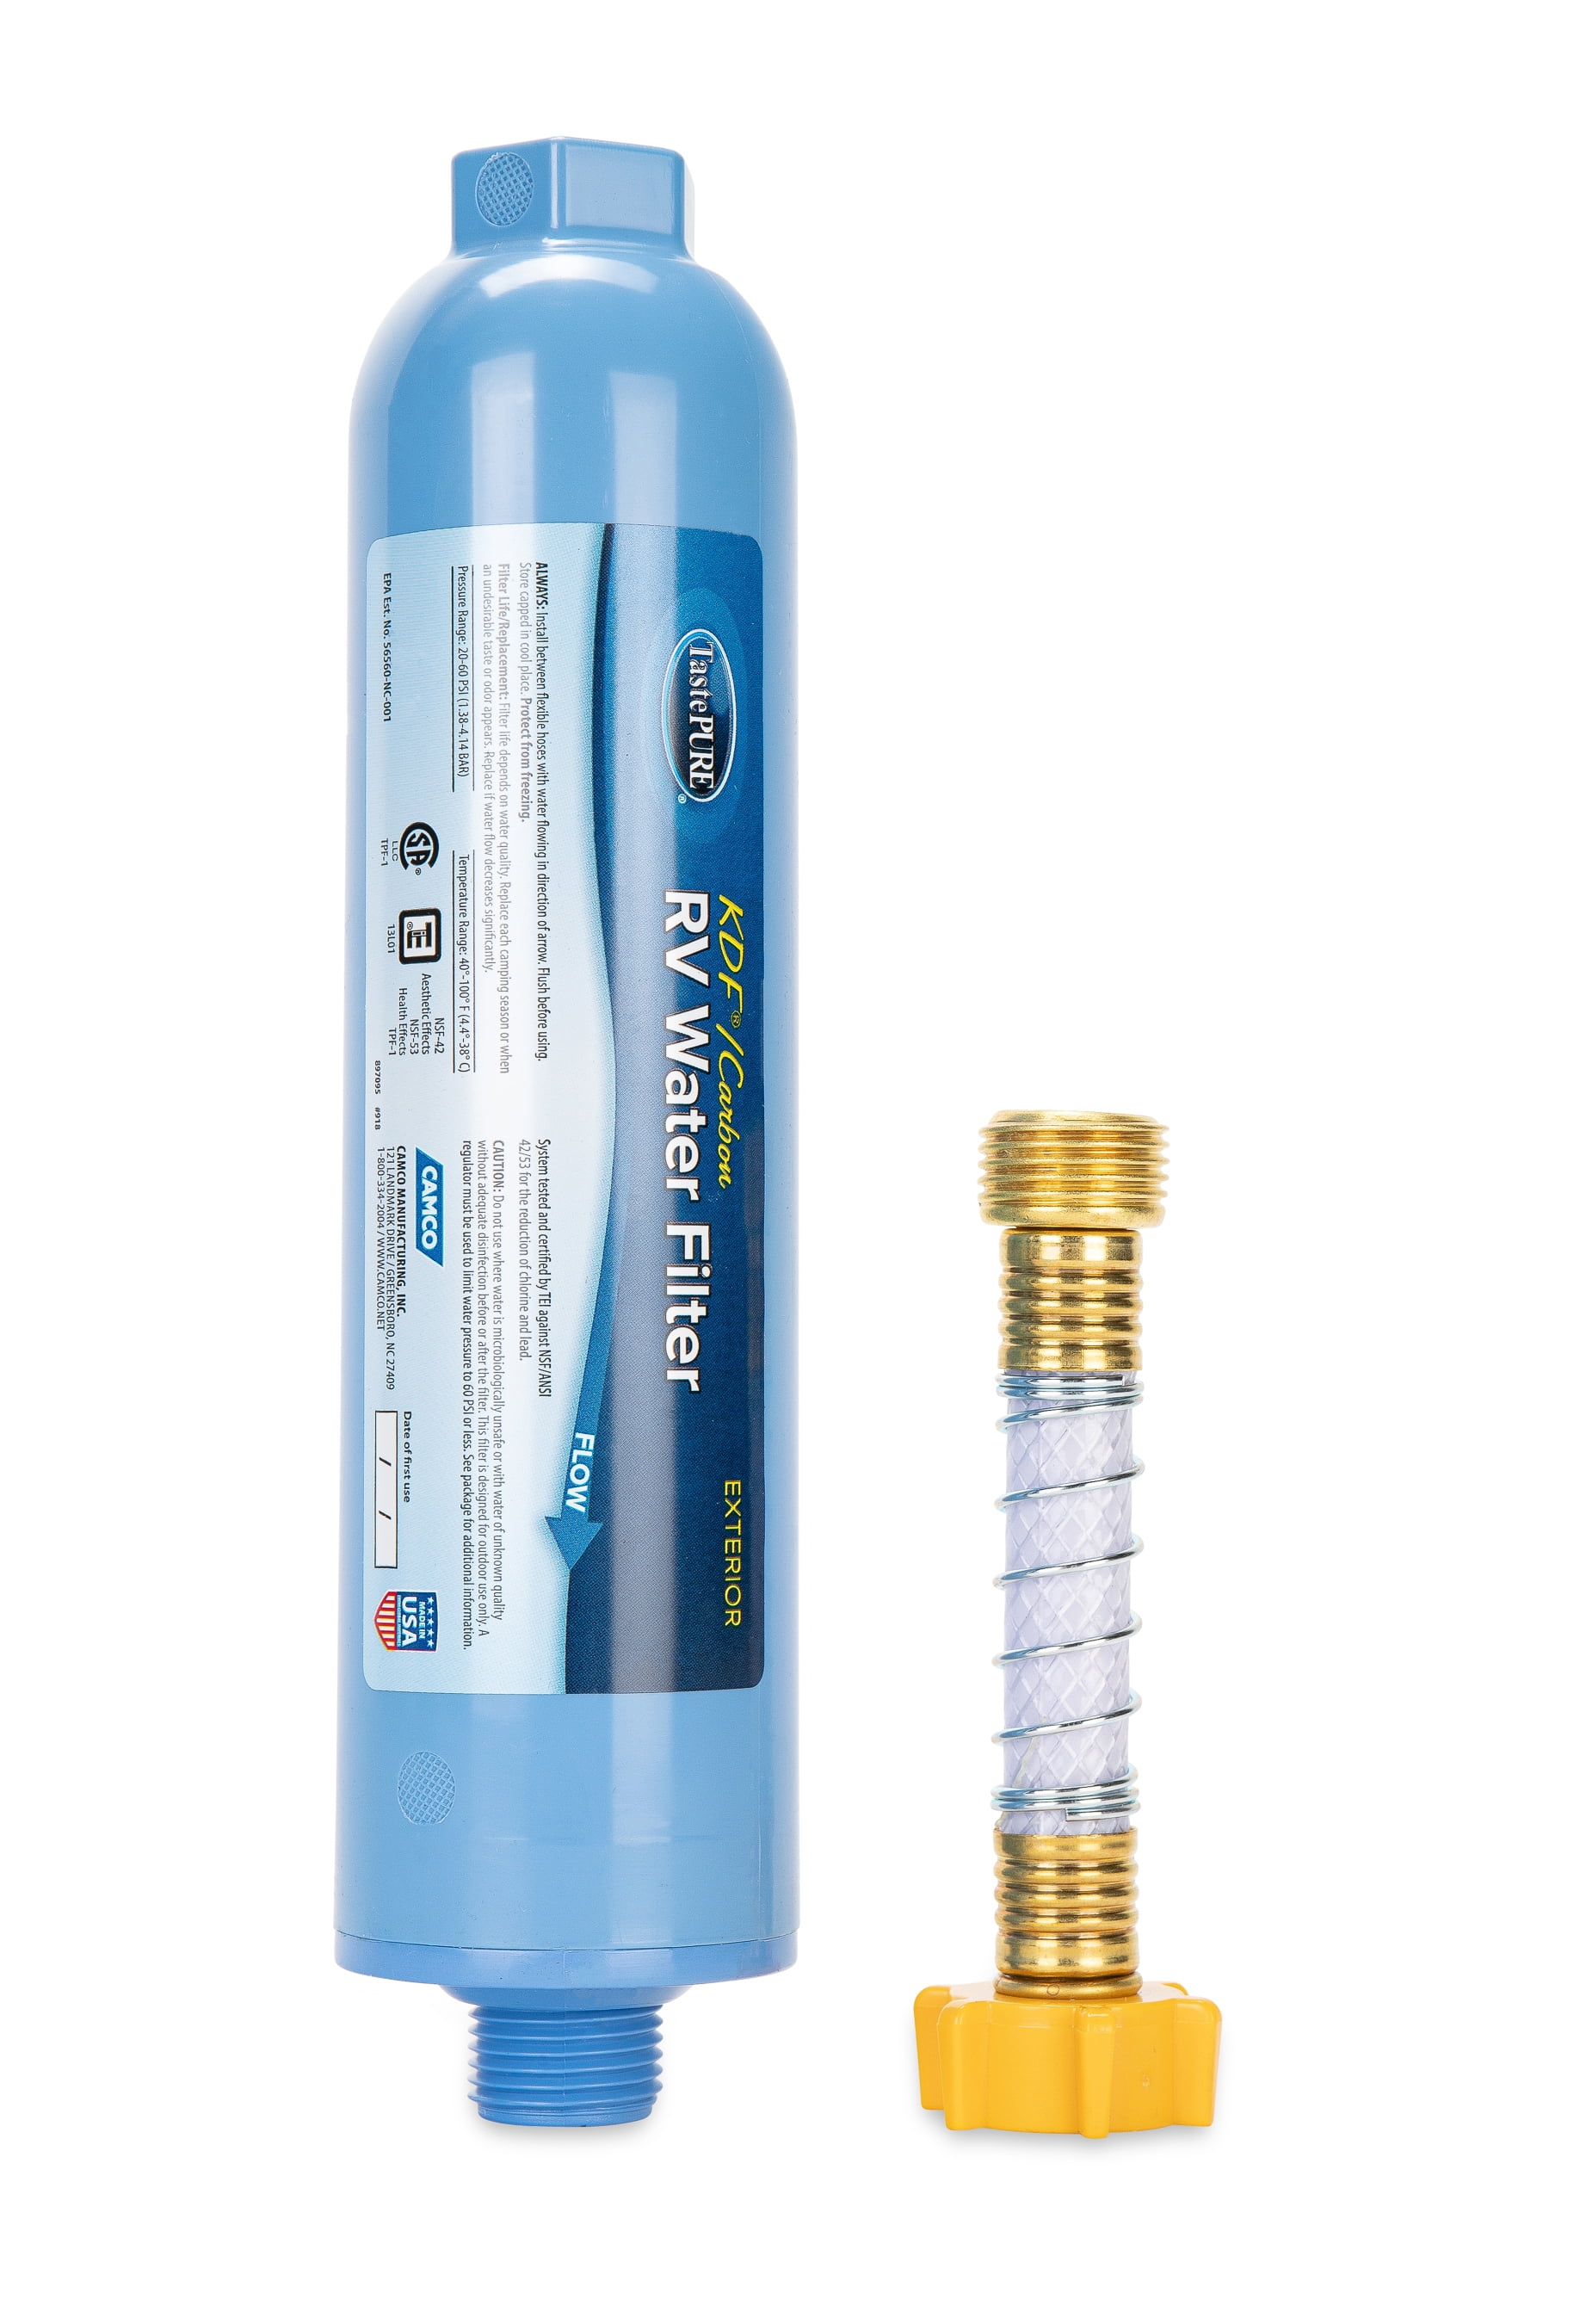 Ayleid RV Inline Water Filter with Flexible Hose Protector,Dedicated for RVs and Marines,2 Pack Drinking & Washing Filter,Reduces Lead,Fluoride,Chlorine,Bad Taste & Odor 